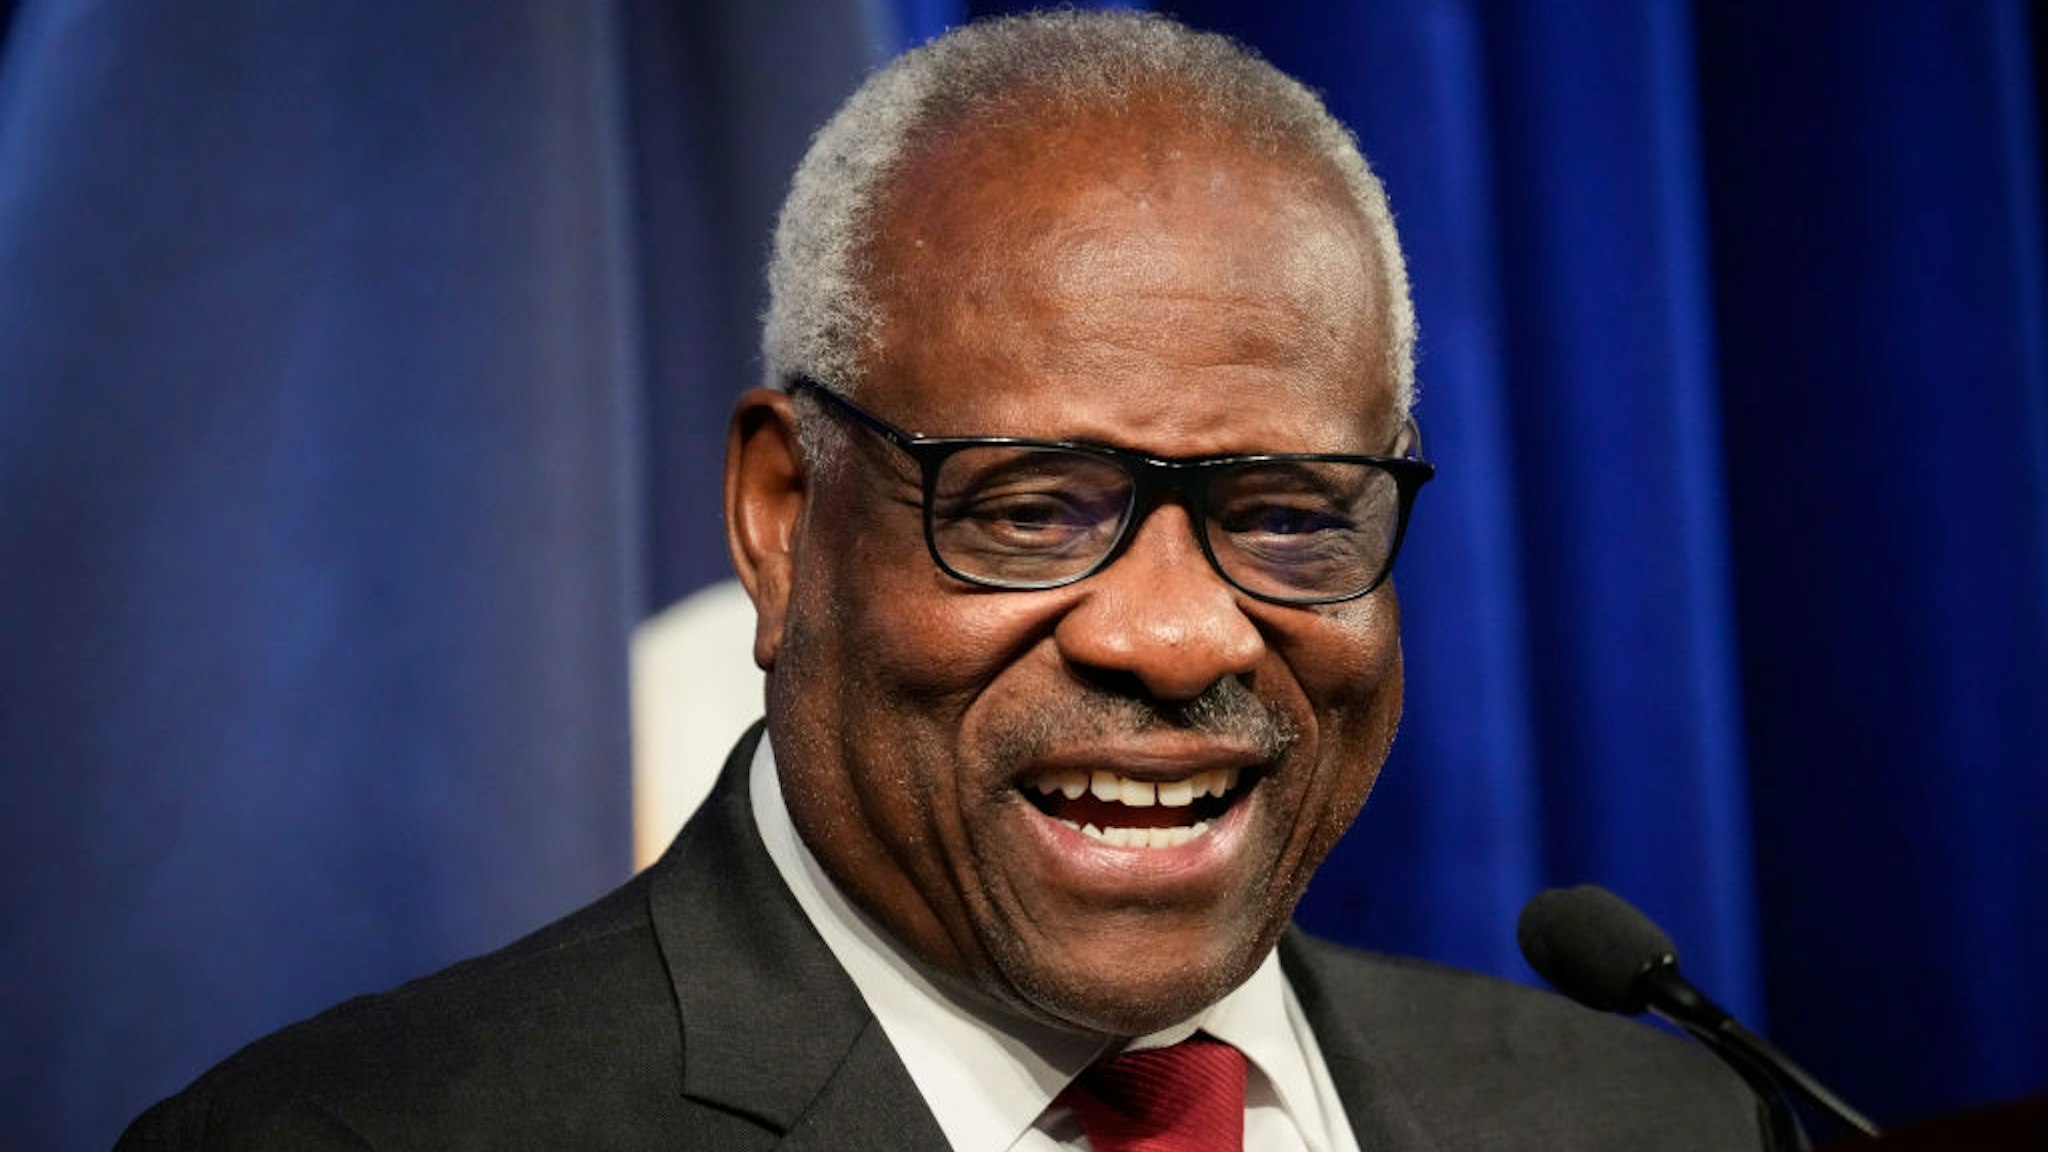 WASHINGTON, DC - OCTOBER 21: Associate Supreme Court Justice Clarence Thomas speaks at the Heritage Foundation on October 21, 2021 in Washington, DC. Clarence Thomas has now served on the Supreme Court for 30 years. He was nominated by former President George H. W. Bush in 1991 and is the second African-American to serve on the high court, following Justice Thurgood Marshall. (Photo by Drew Angerer/Getty Images)